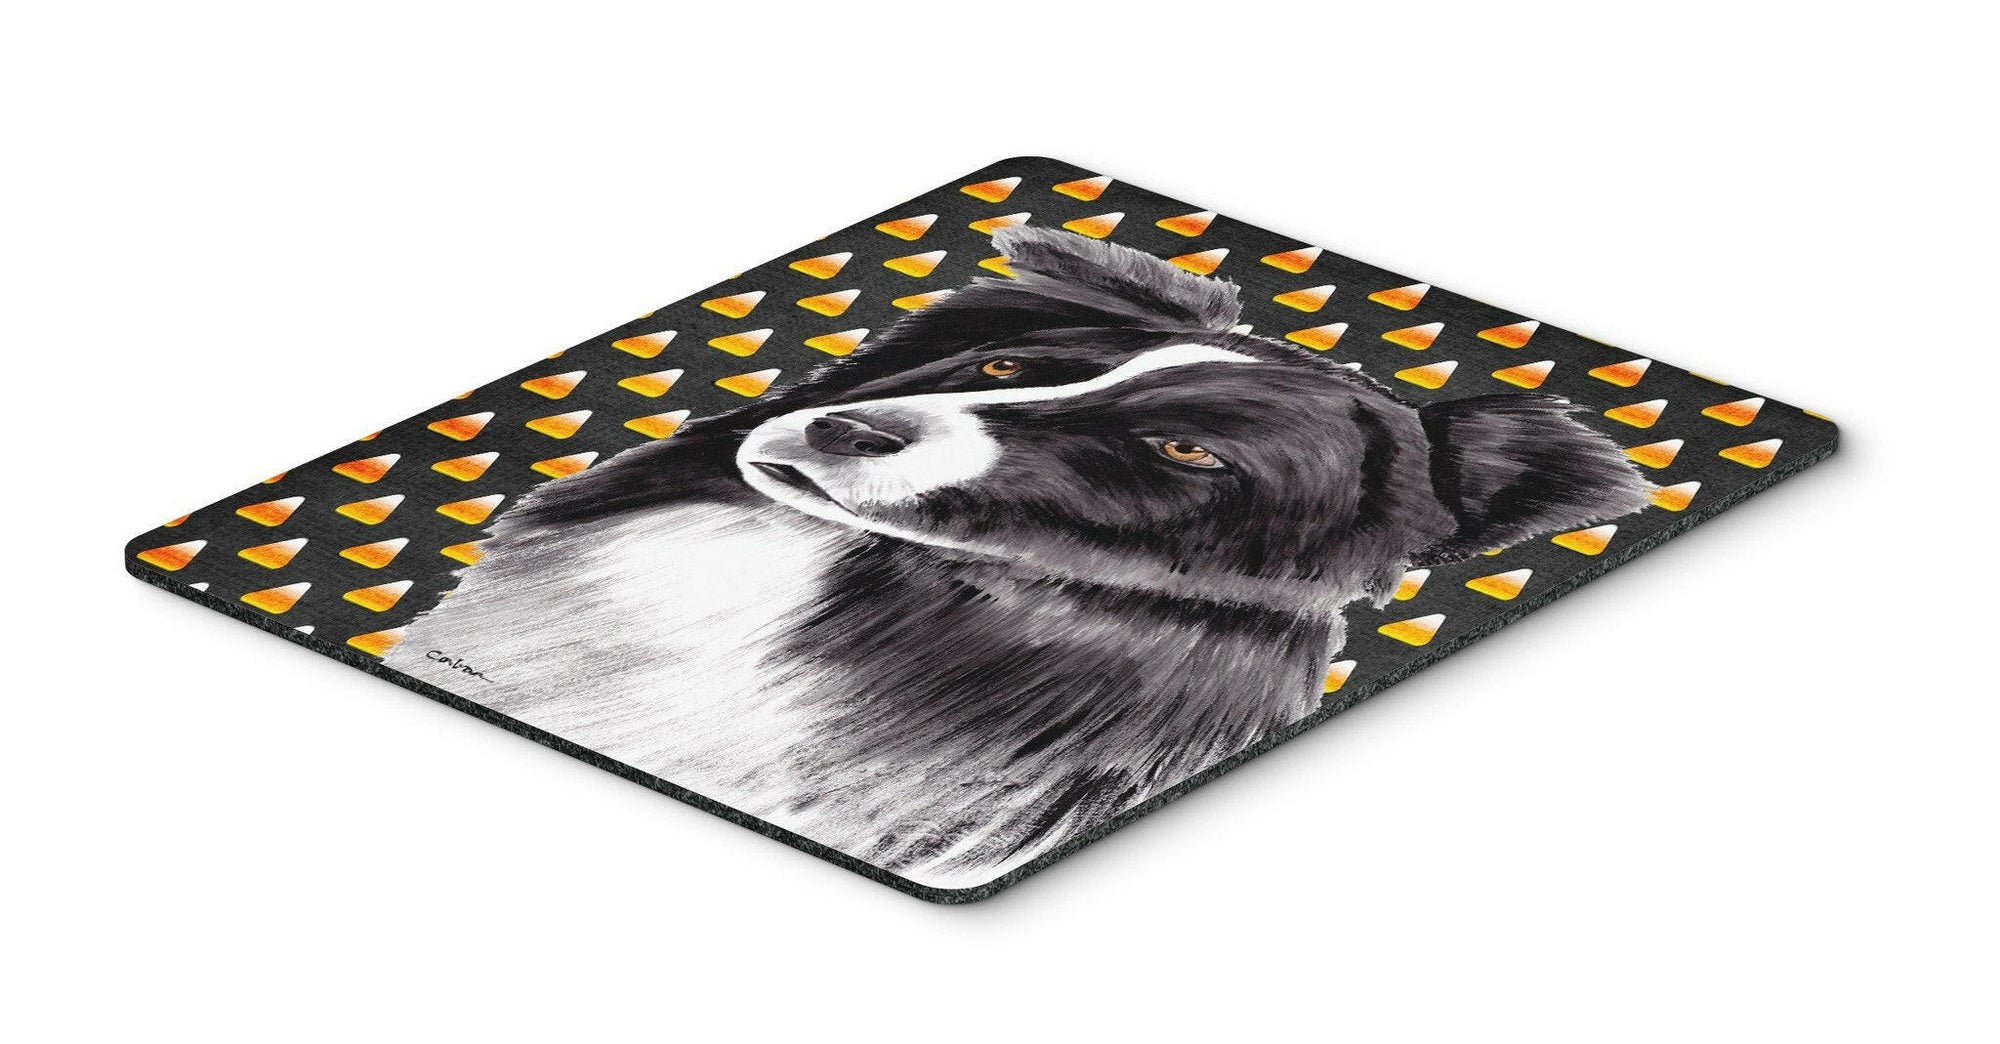 Border Collie Candy Corn Halloween Portrait Mouse Pad, Hot Pad or Trivet by Caroline's Treasures